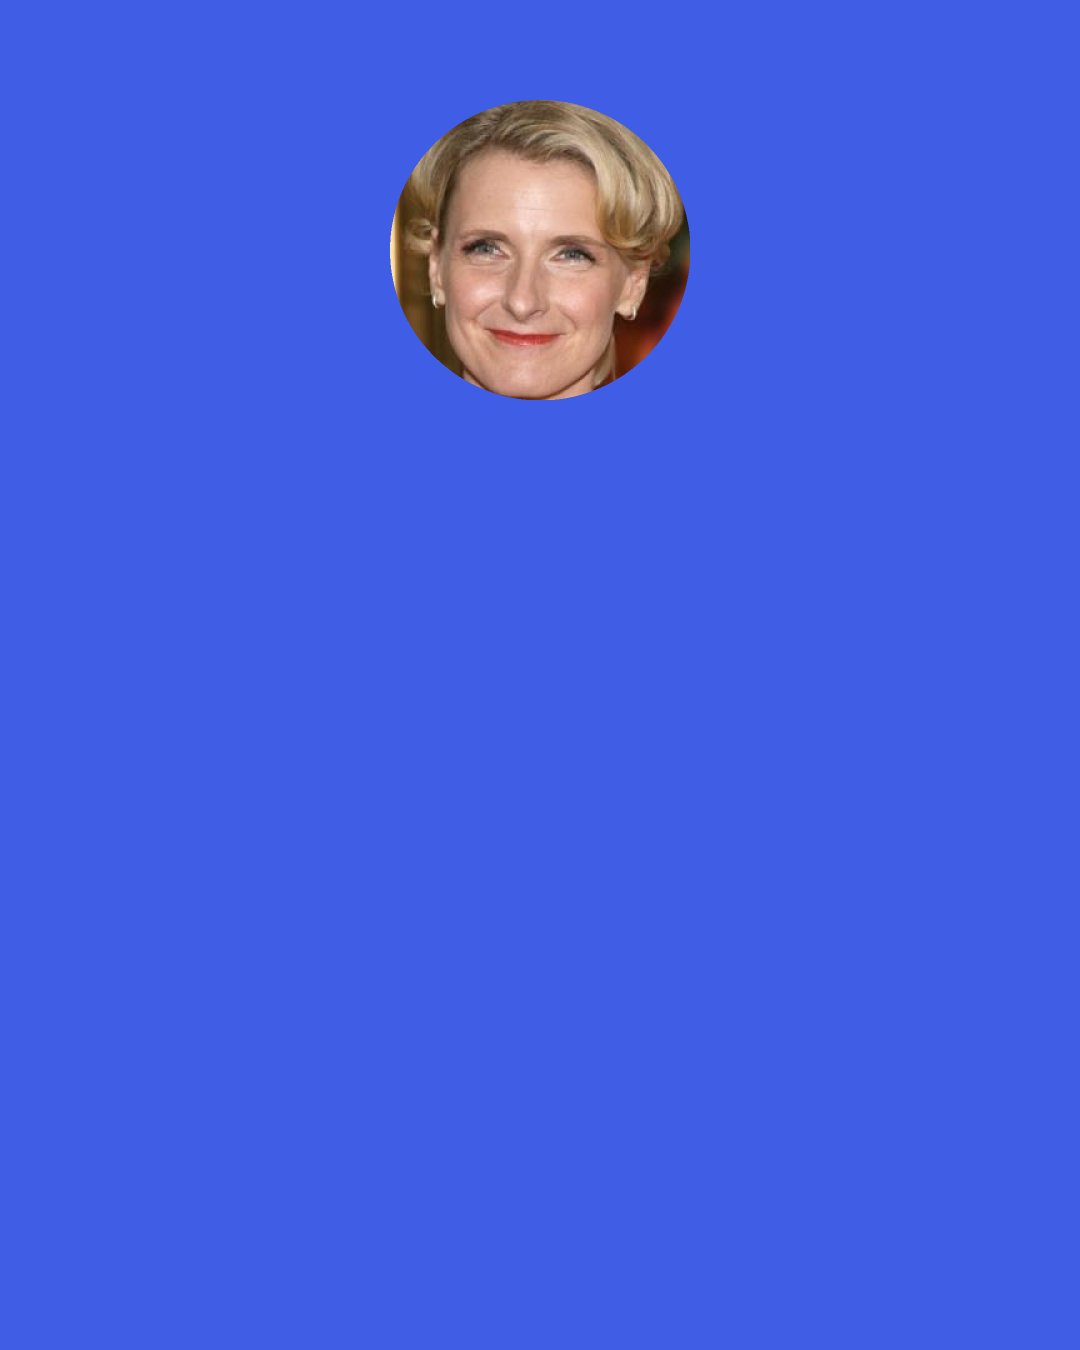 Elizabeth Gilbert: I would like to spend the rest of my days in a place so silent–and working at a pace so slow–that I would be able to hear myself living.